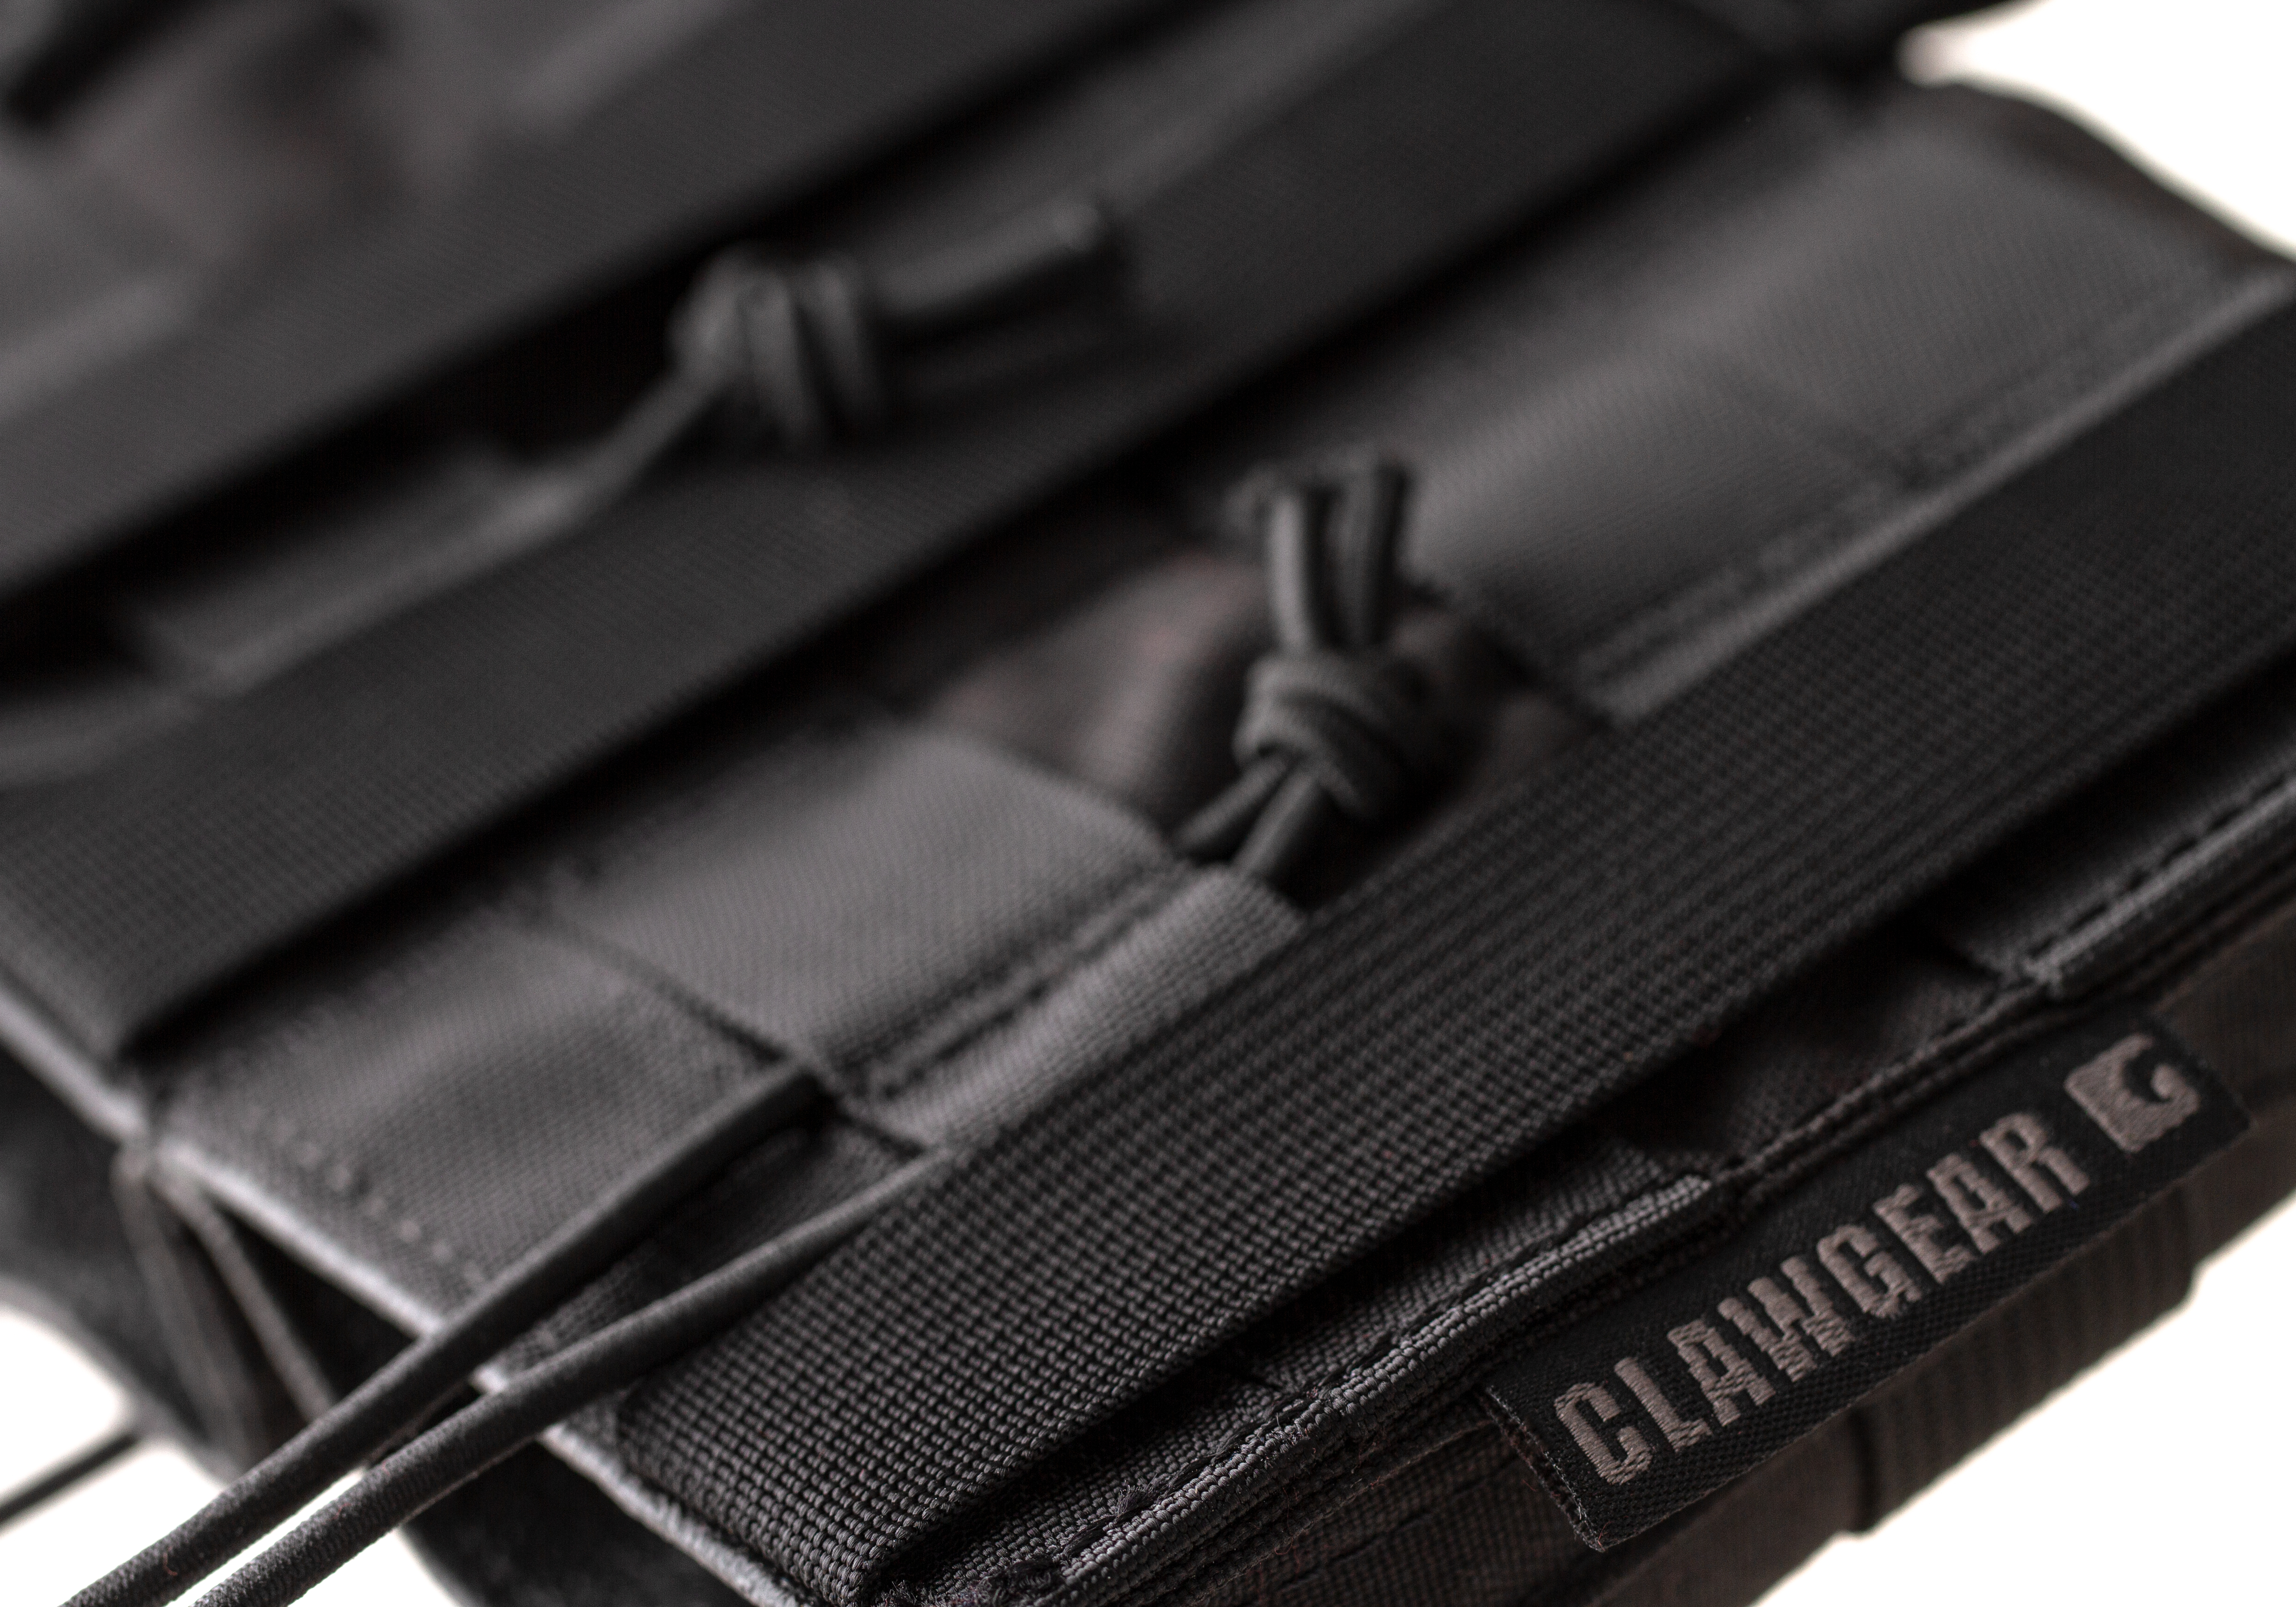 Porte chargeur 5.56mm Mag Pouch LC Clawgear